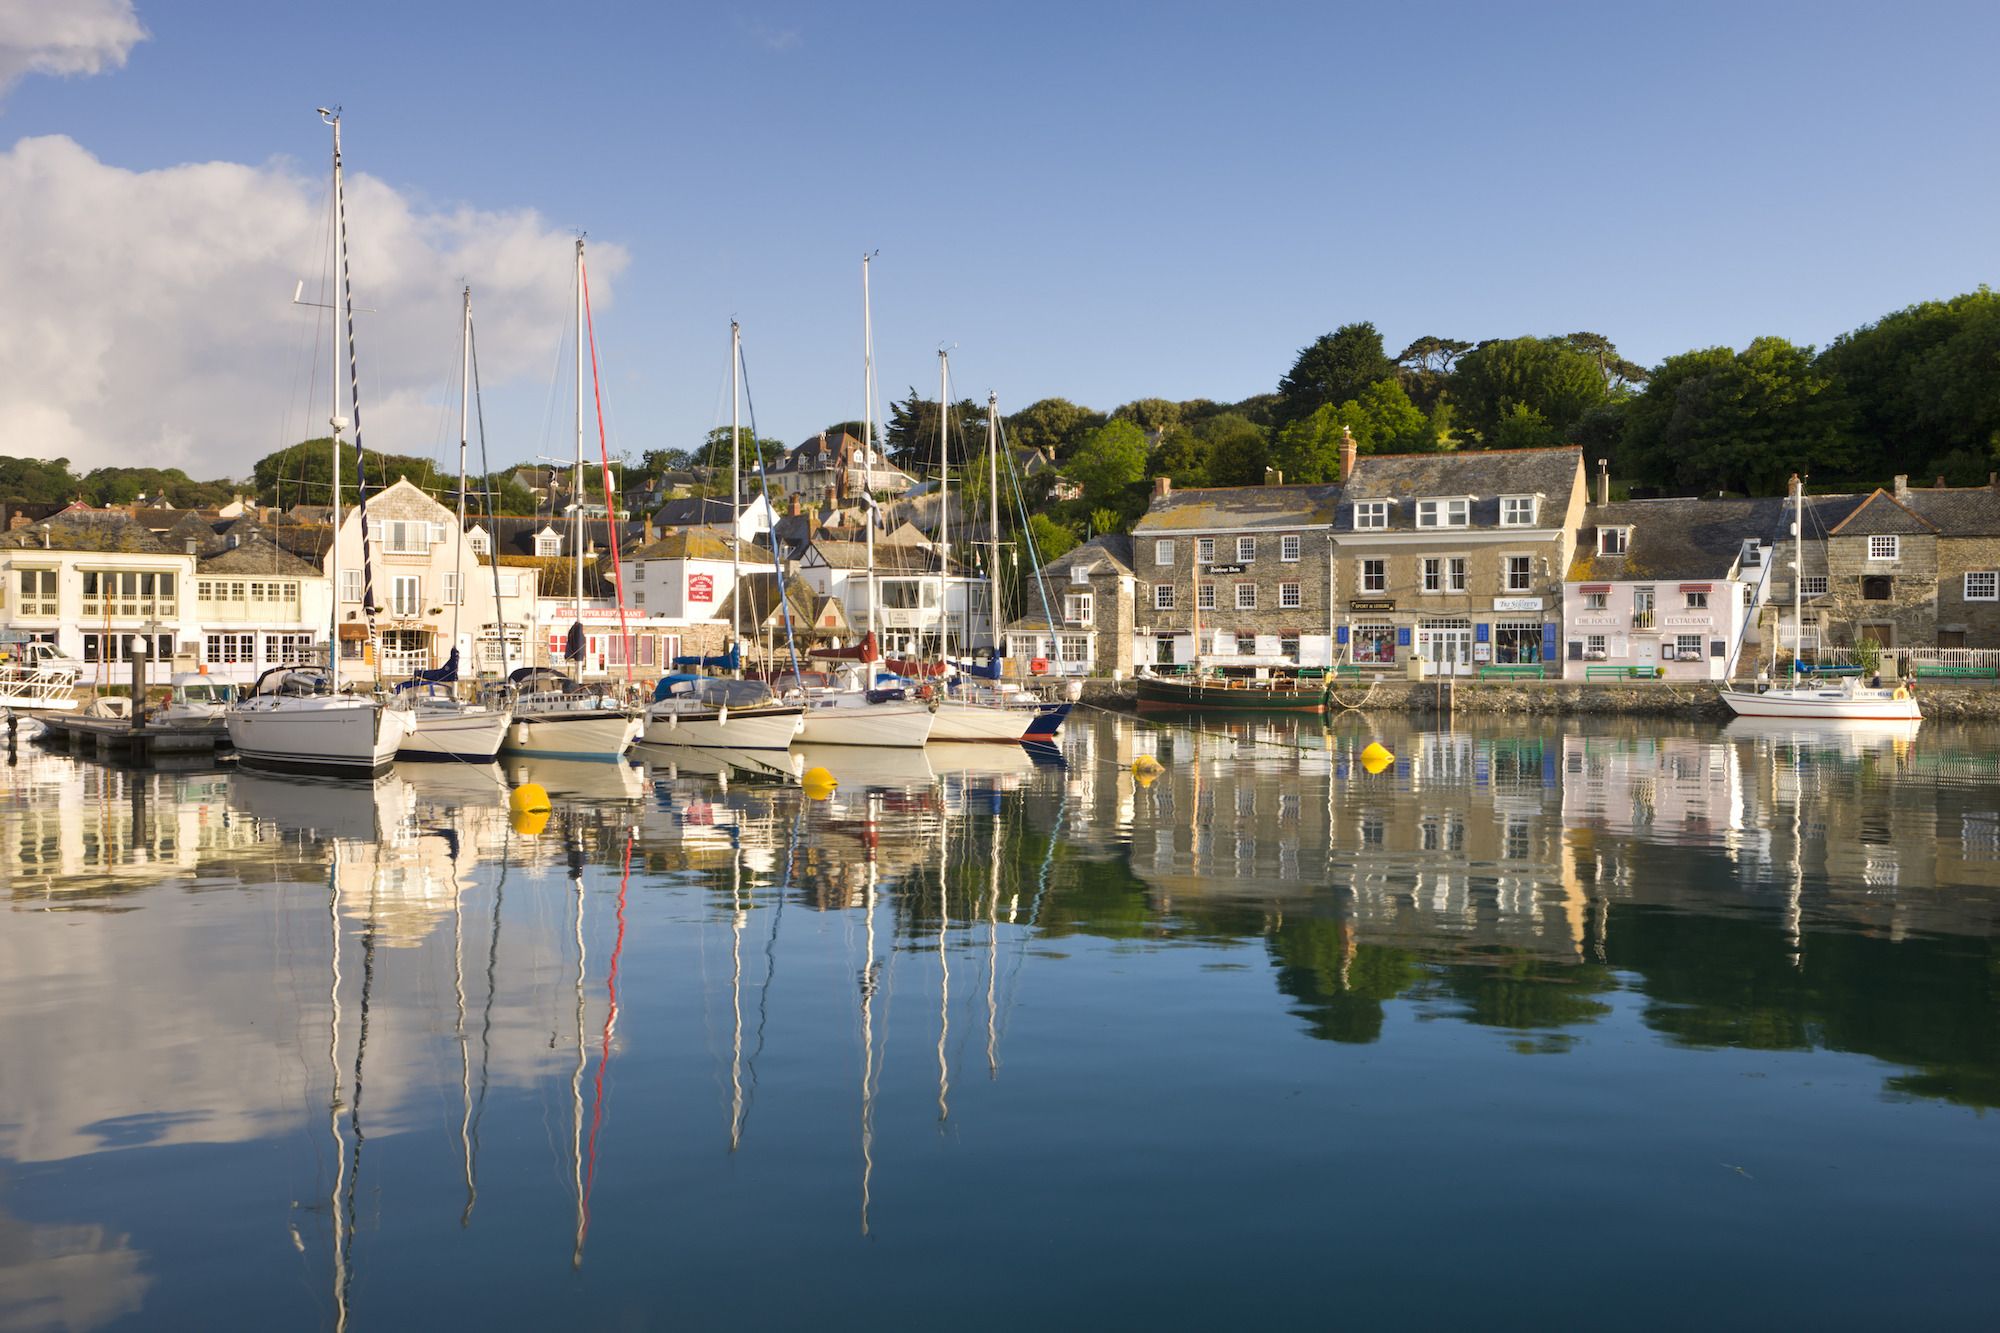 Padstow, a quaint fishing village with a picturesque harbour on the north coast of Cornwall, Cornwall, England, United Kingdom, Europe